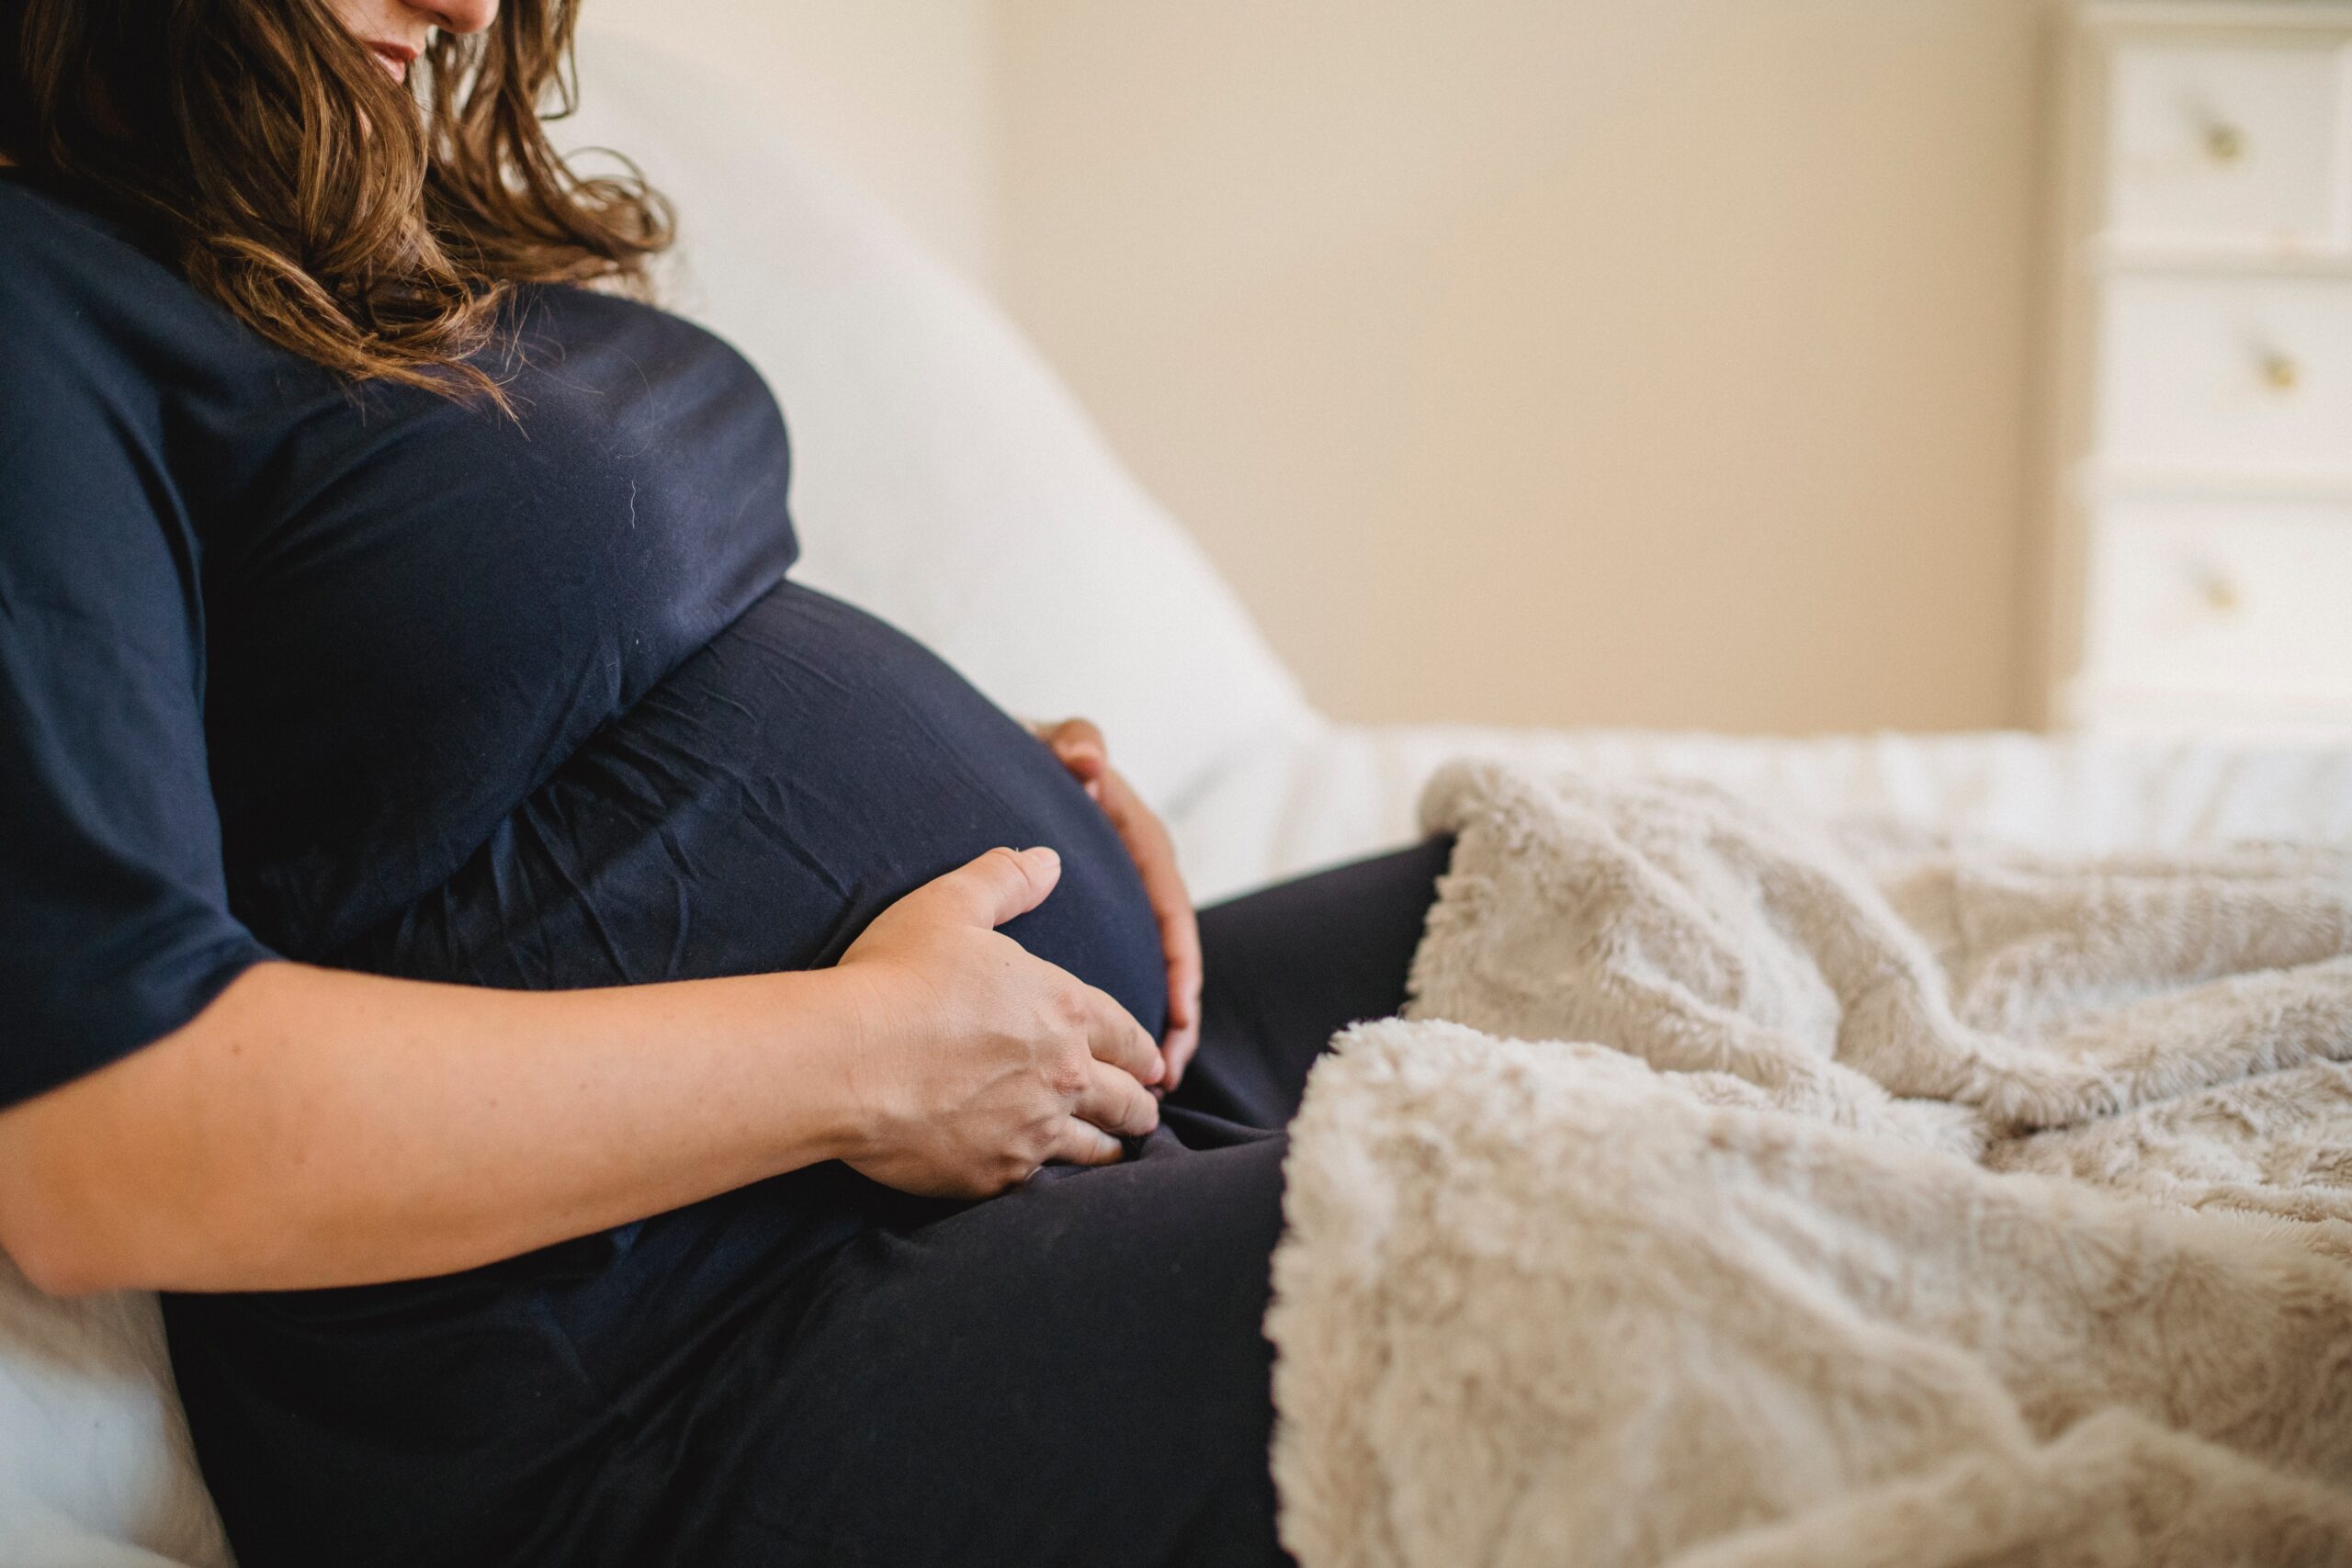 10 Common Pregnancy Myths Debunked: Separating Fact from Fiction